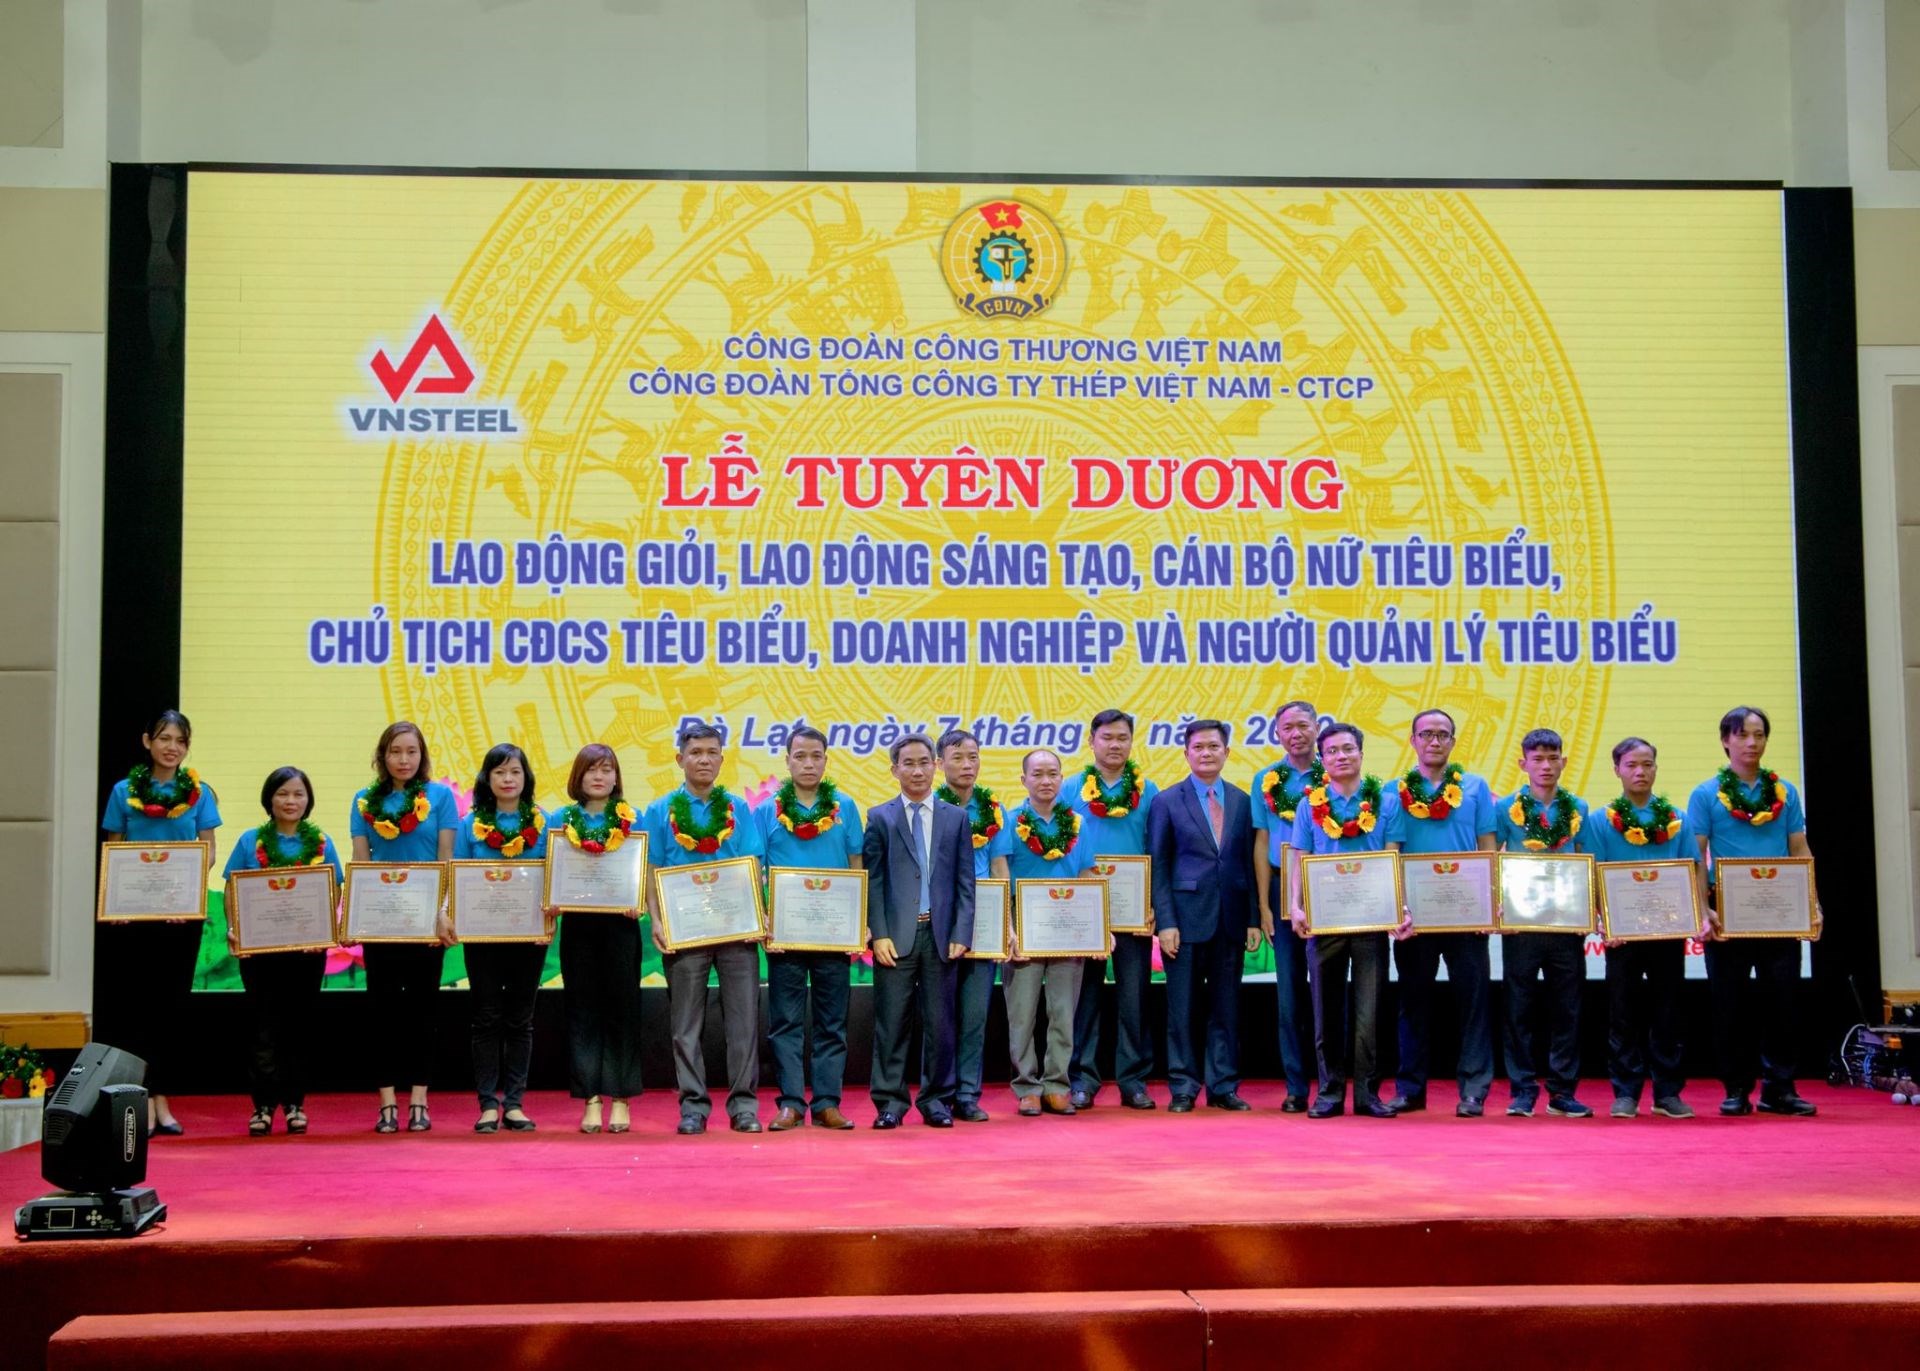 Mr. Nghiem Xuan Da - Member of the Board of Directors, Former Secretary of the Party Committee, Former Chairman of the Board of Directors of Vietnam Steel Corporation and Mr. Vuong Duy Khanh - Chairman of Trade Union of Vietnam Steel Corporation - Vinh JS